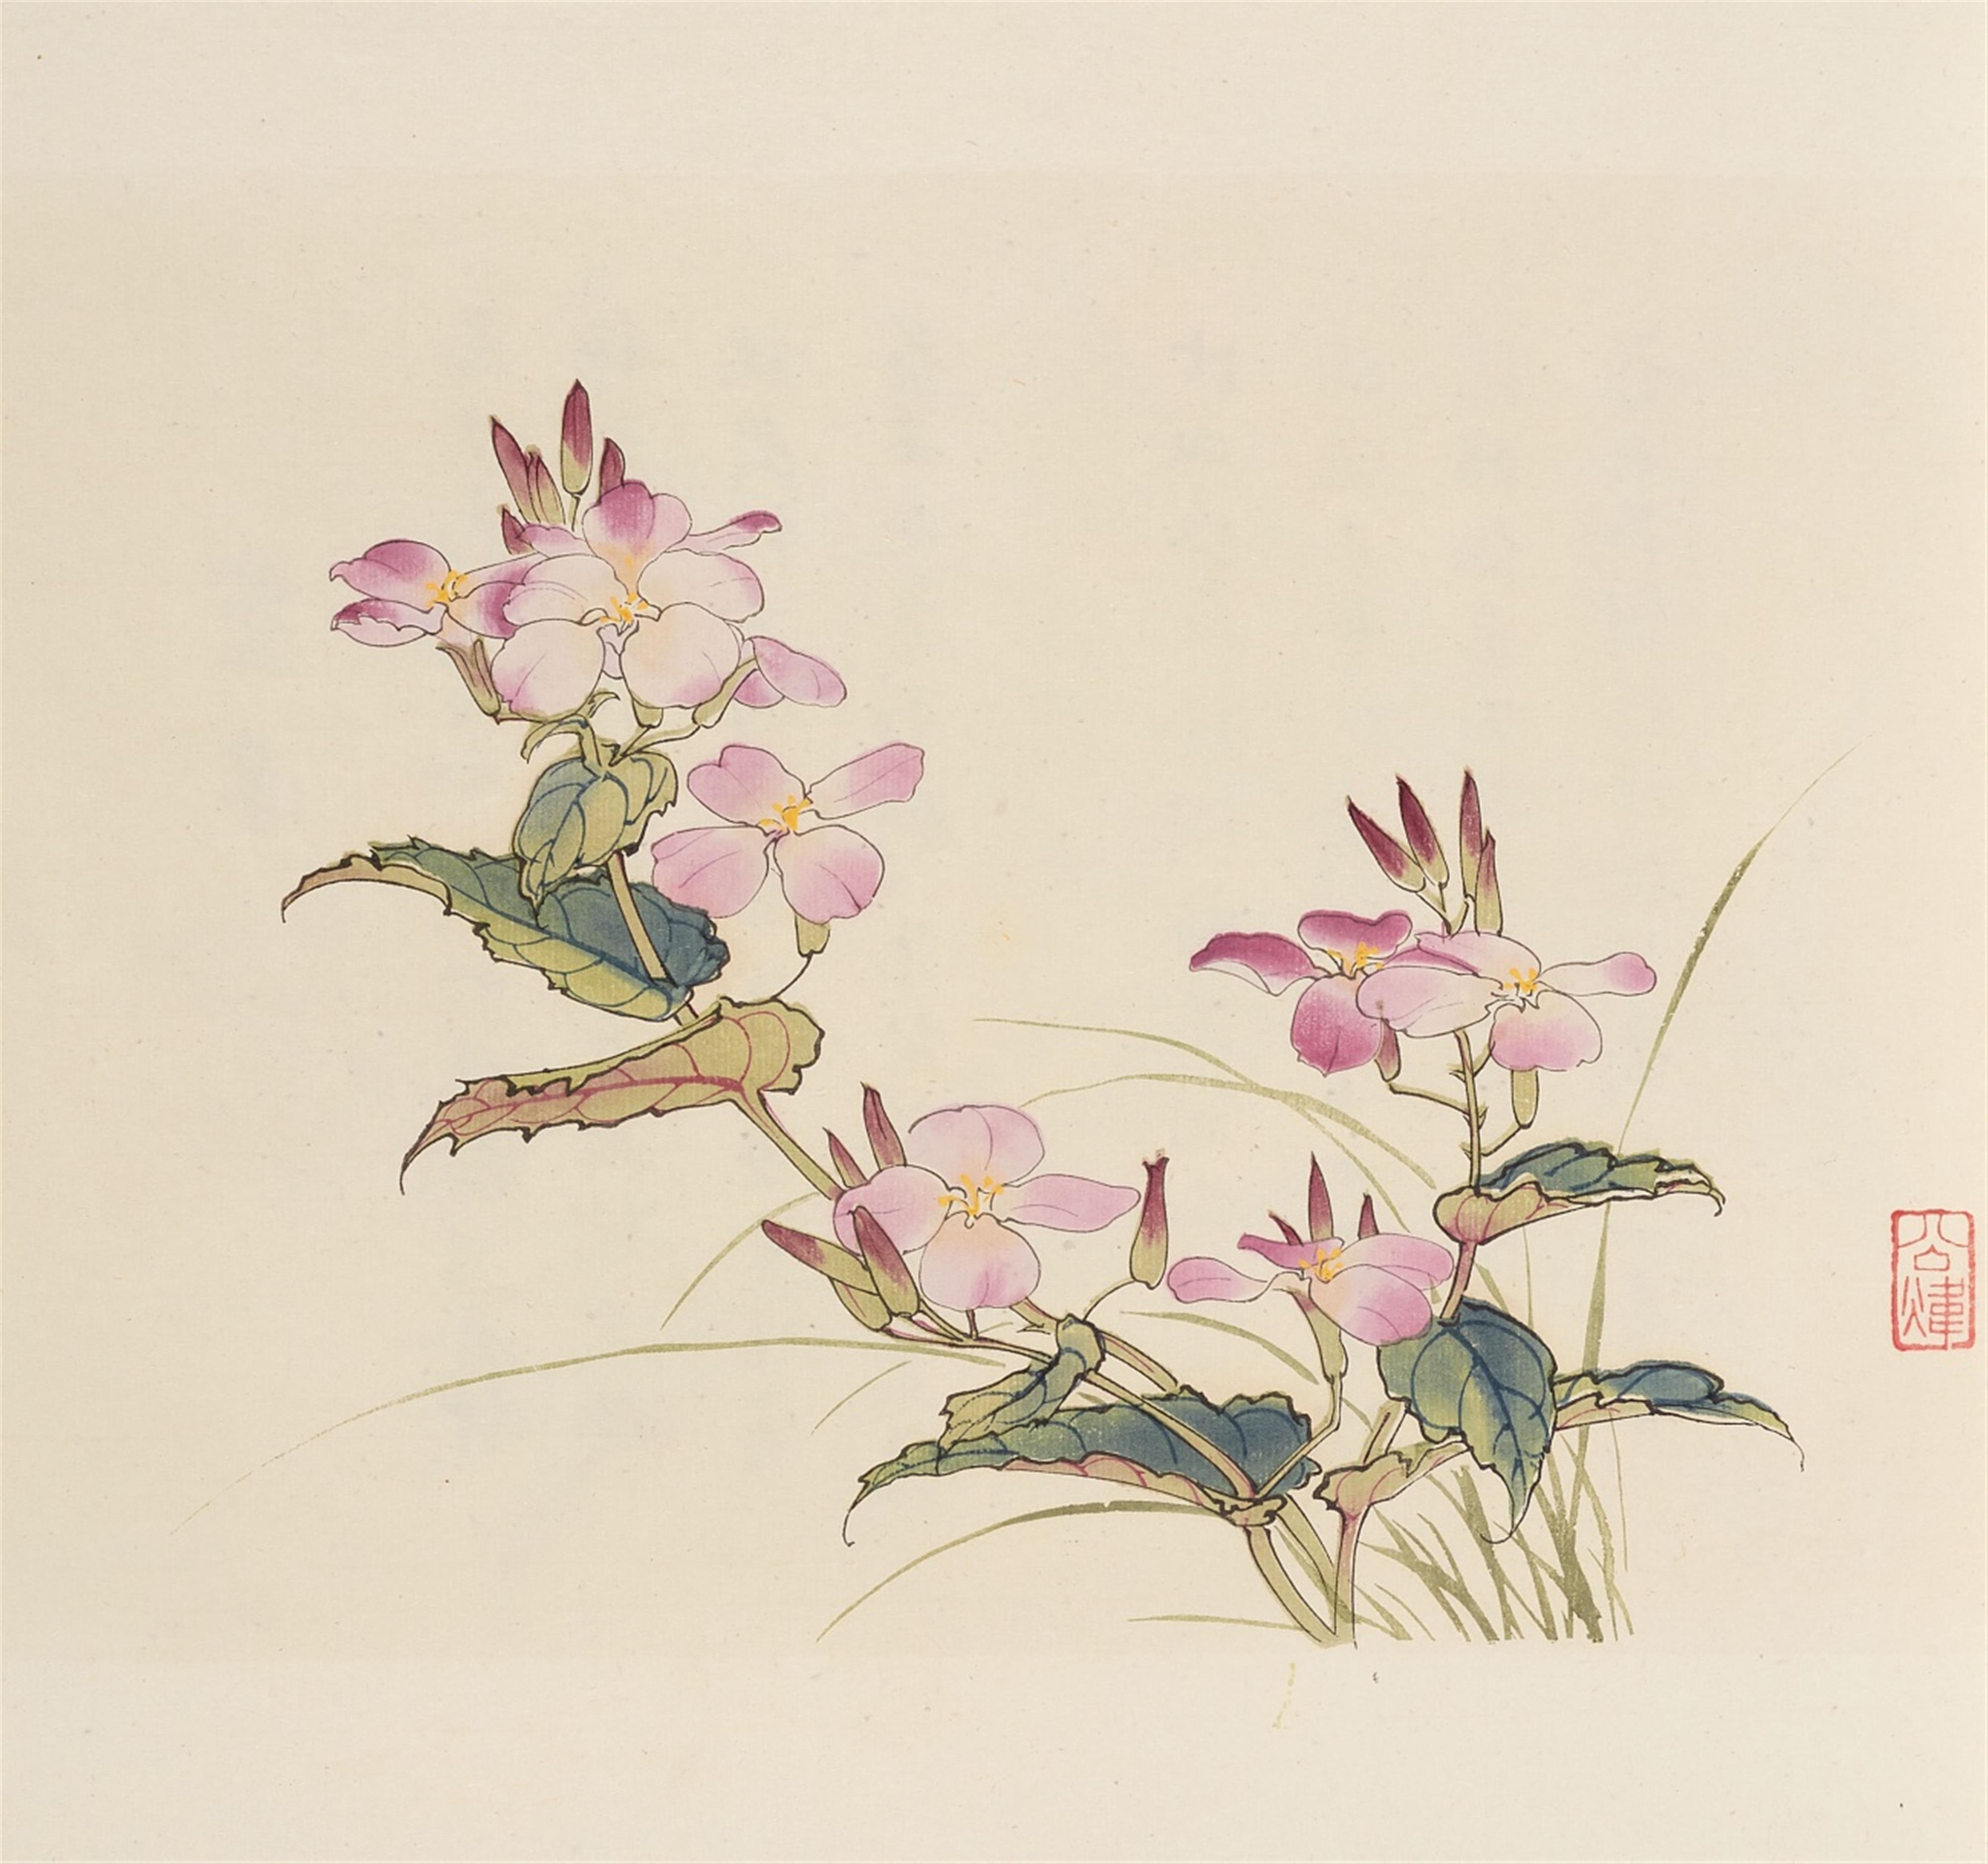 Yu Feian, attributed to
Tian Shiguang and Yu Zhizhen (1915-1995) - One volume of ten titled "Baihua qifang" (A hundred flowers blossom) with ten colour woodblock prints. Rongbaozhai, Beijing 1960, 6th month. - image-3